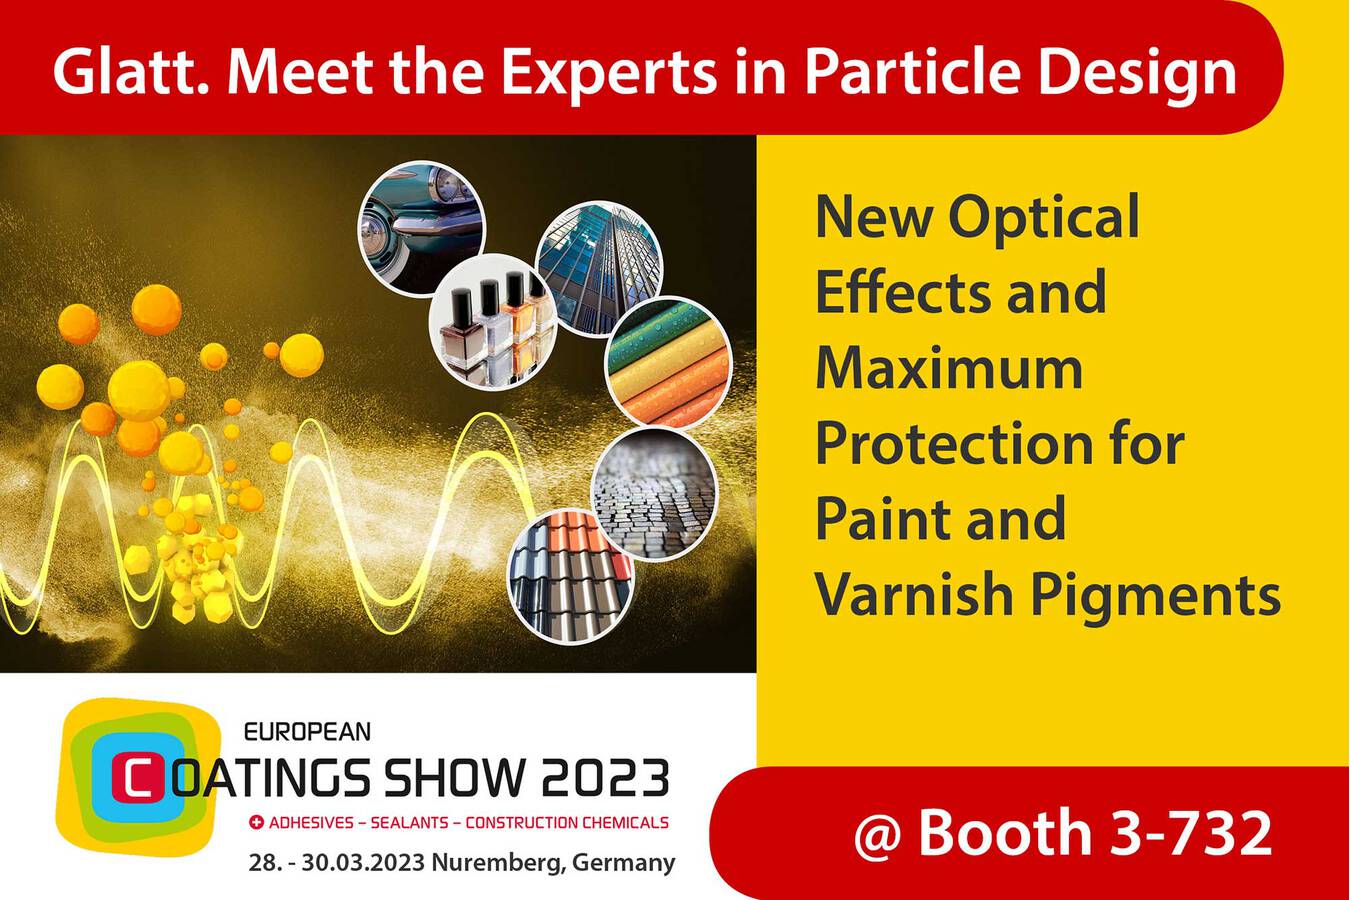 Glatt Particle Design for Additives and Fillers at ECS 2023 - Booth 3-732.  Glatt will focus on manufacturing technologies and novel powder materials for paints, coatings and construction chemicals.